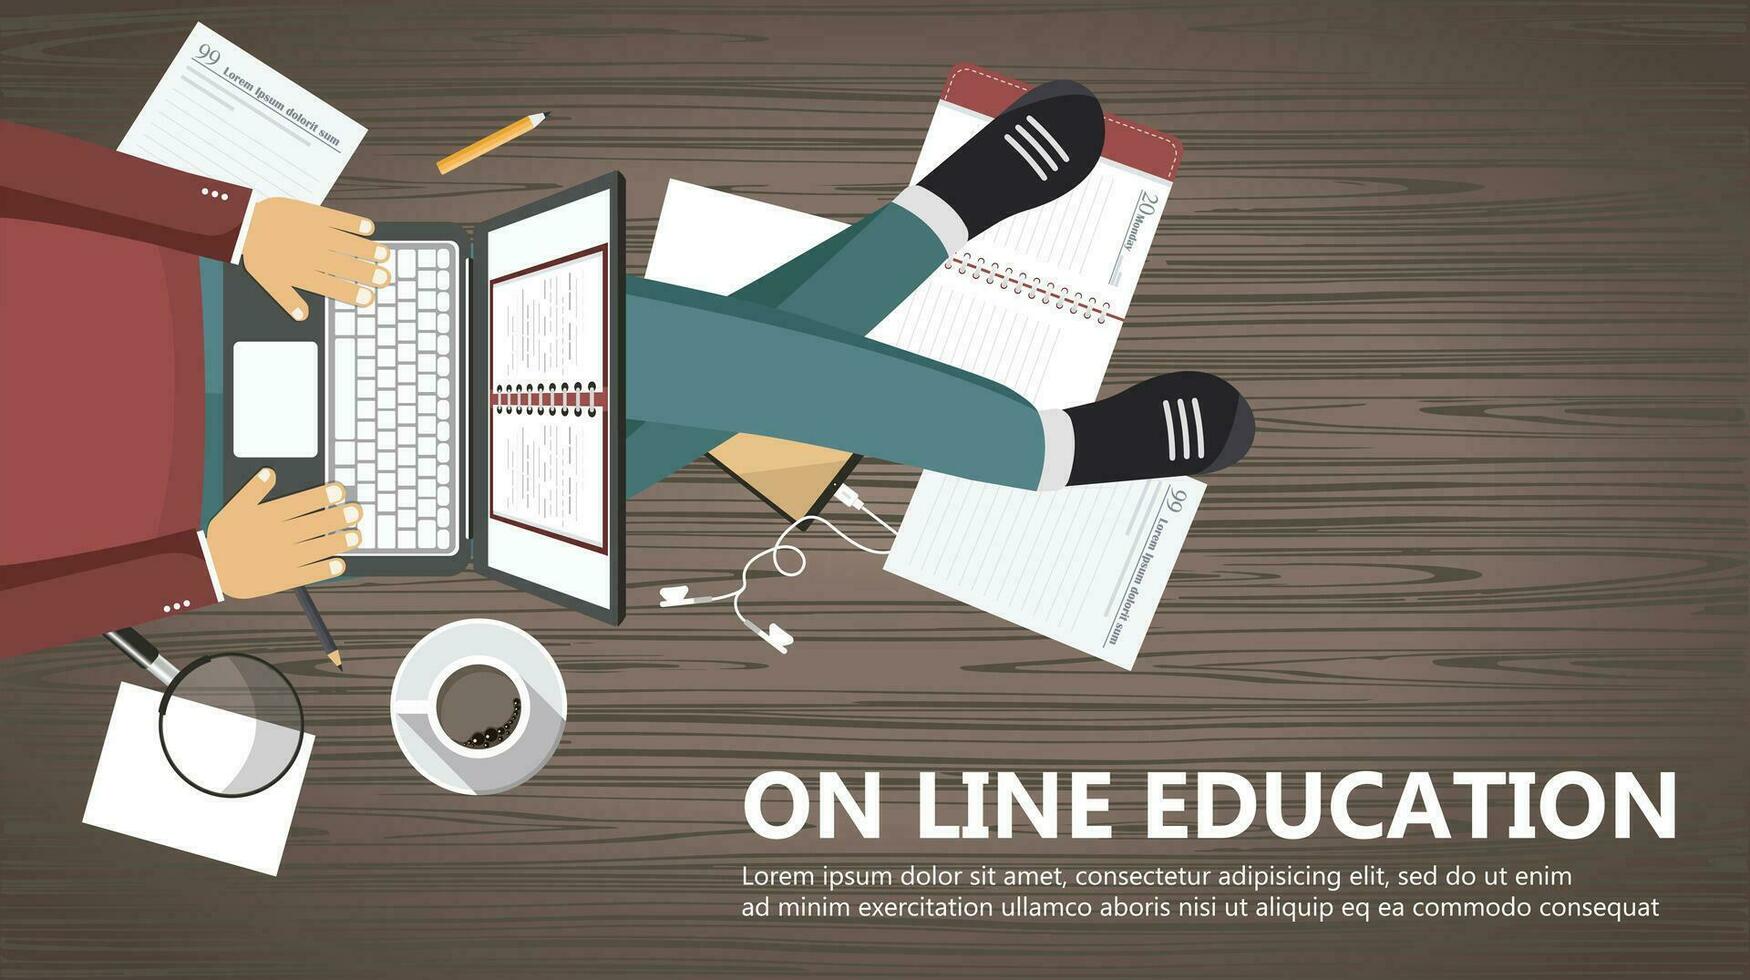 Online education business banner. Man sitting and holding lap top in his lap. Flat vector illustration